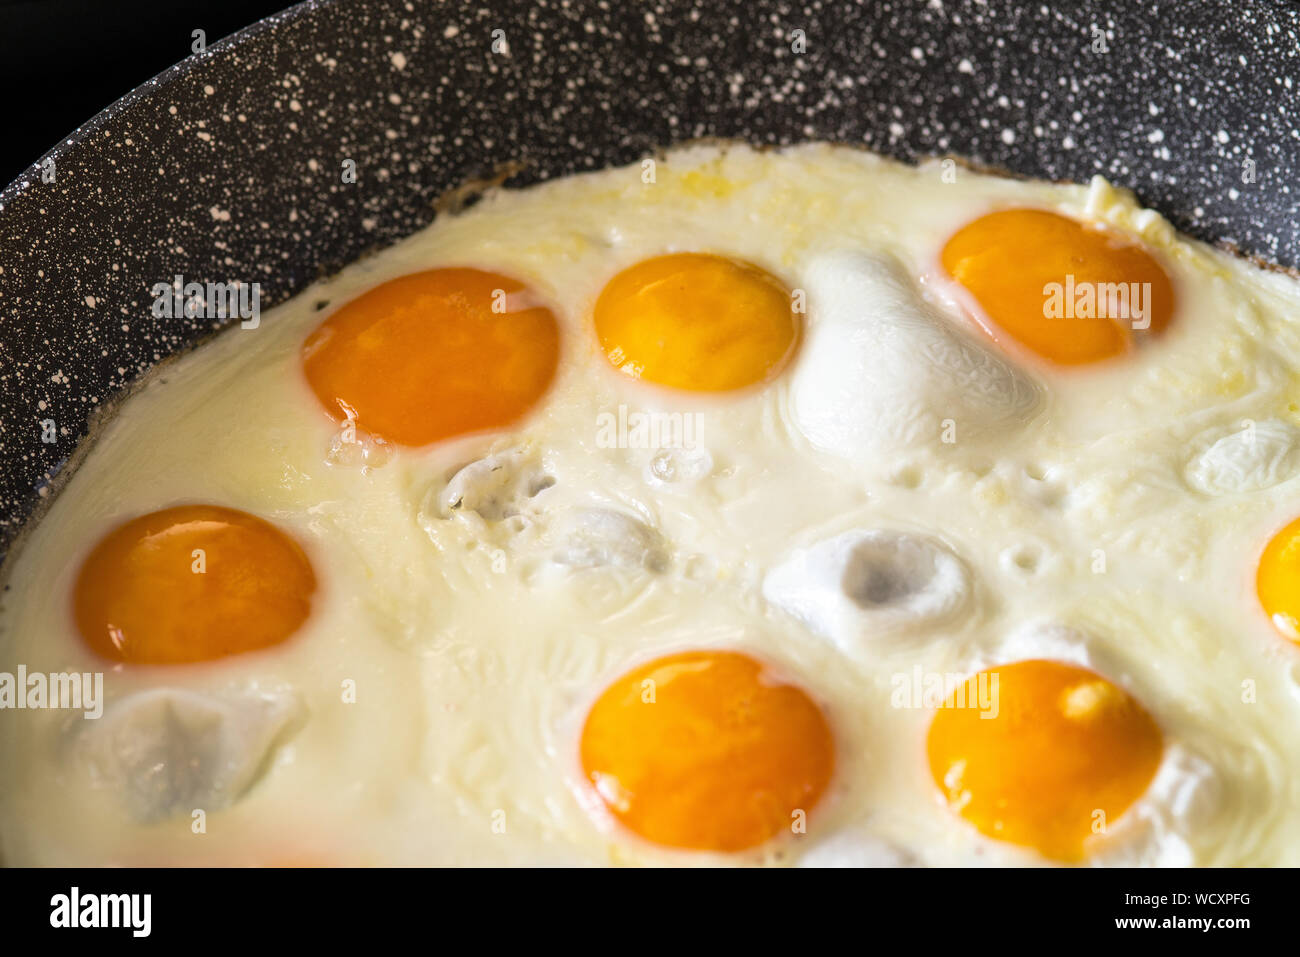 Detail Shot Of Breakfast Consisting Of Fried Egg Stock Photo